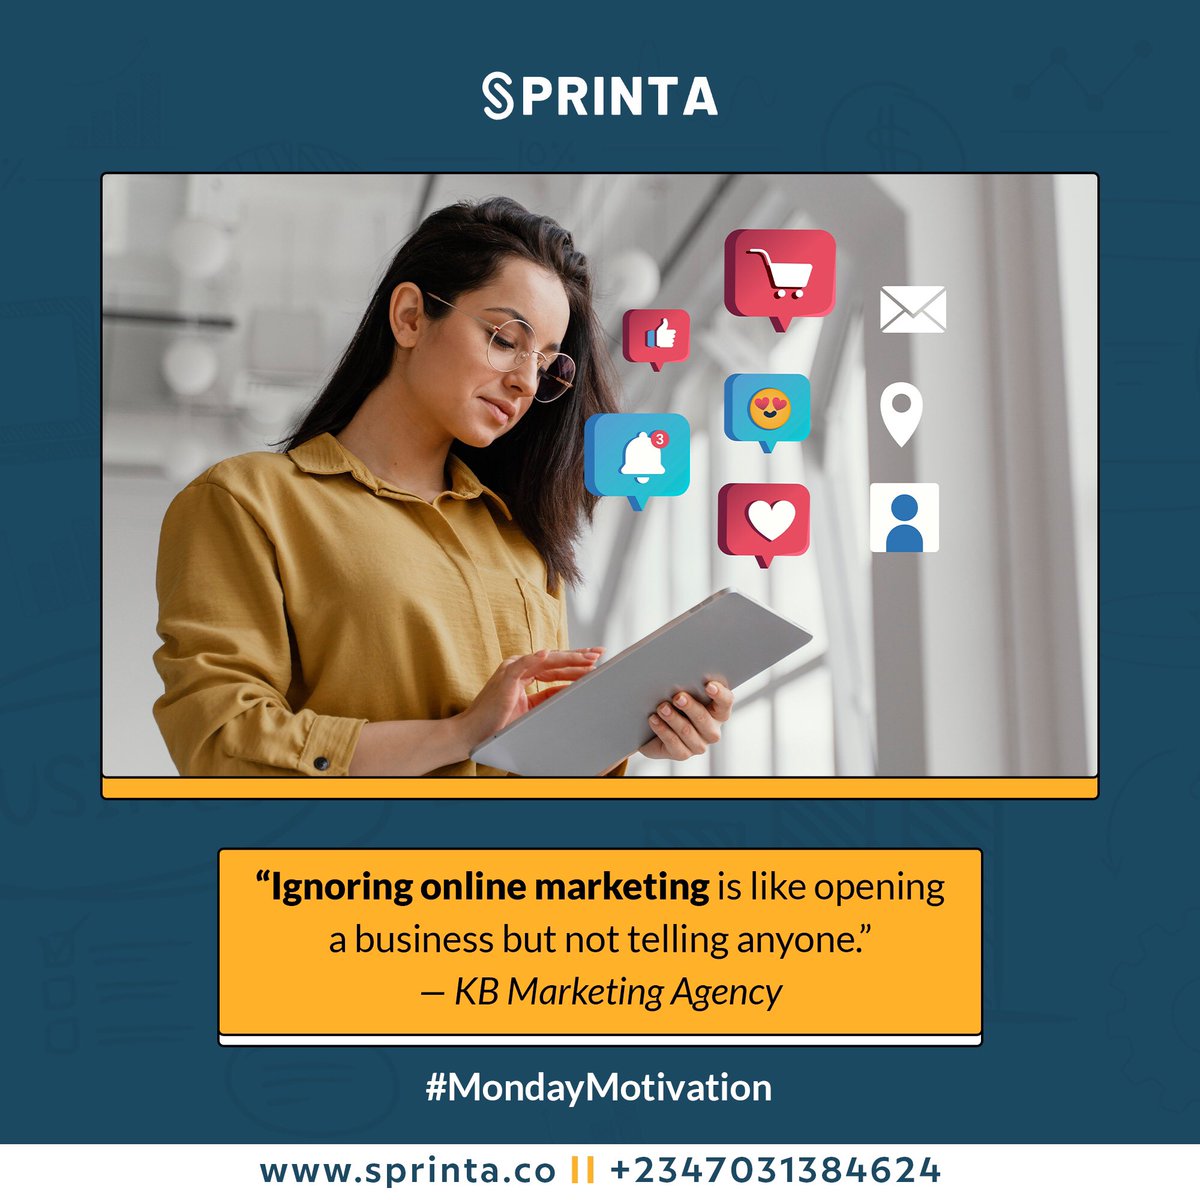 Spread the word about your business. Invest in marketing 🤝

#sprintahq #onlinemarketing #onlinemarketingstrategies #onlinemarketingtips #digitalmarketing #digitalmarketingtips #digitalmarketingservices #mondaymotivation